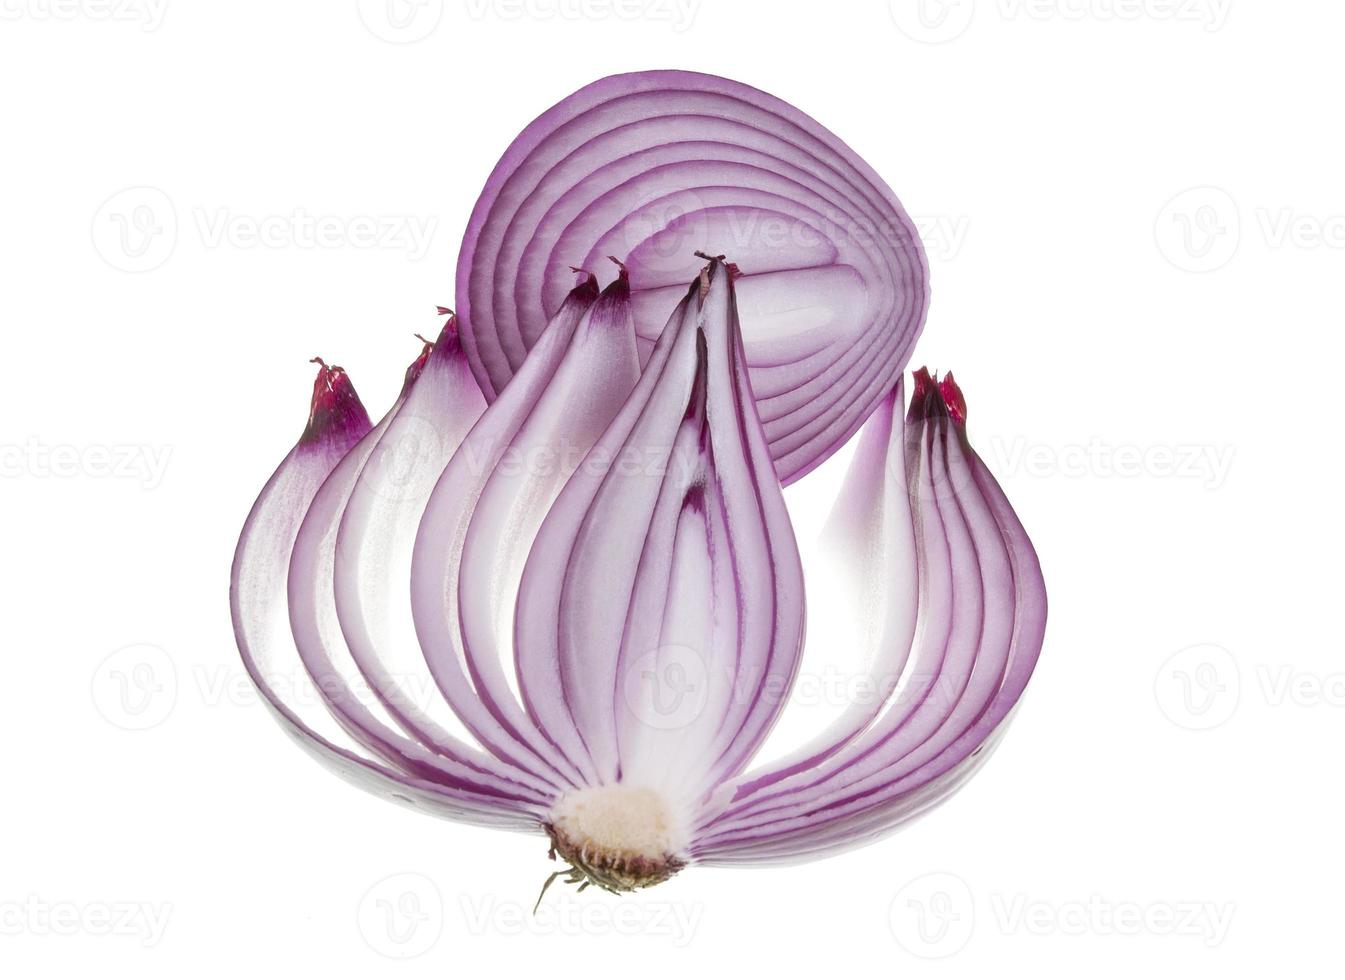 Red Onion photo